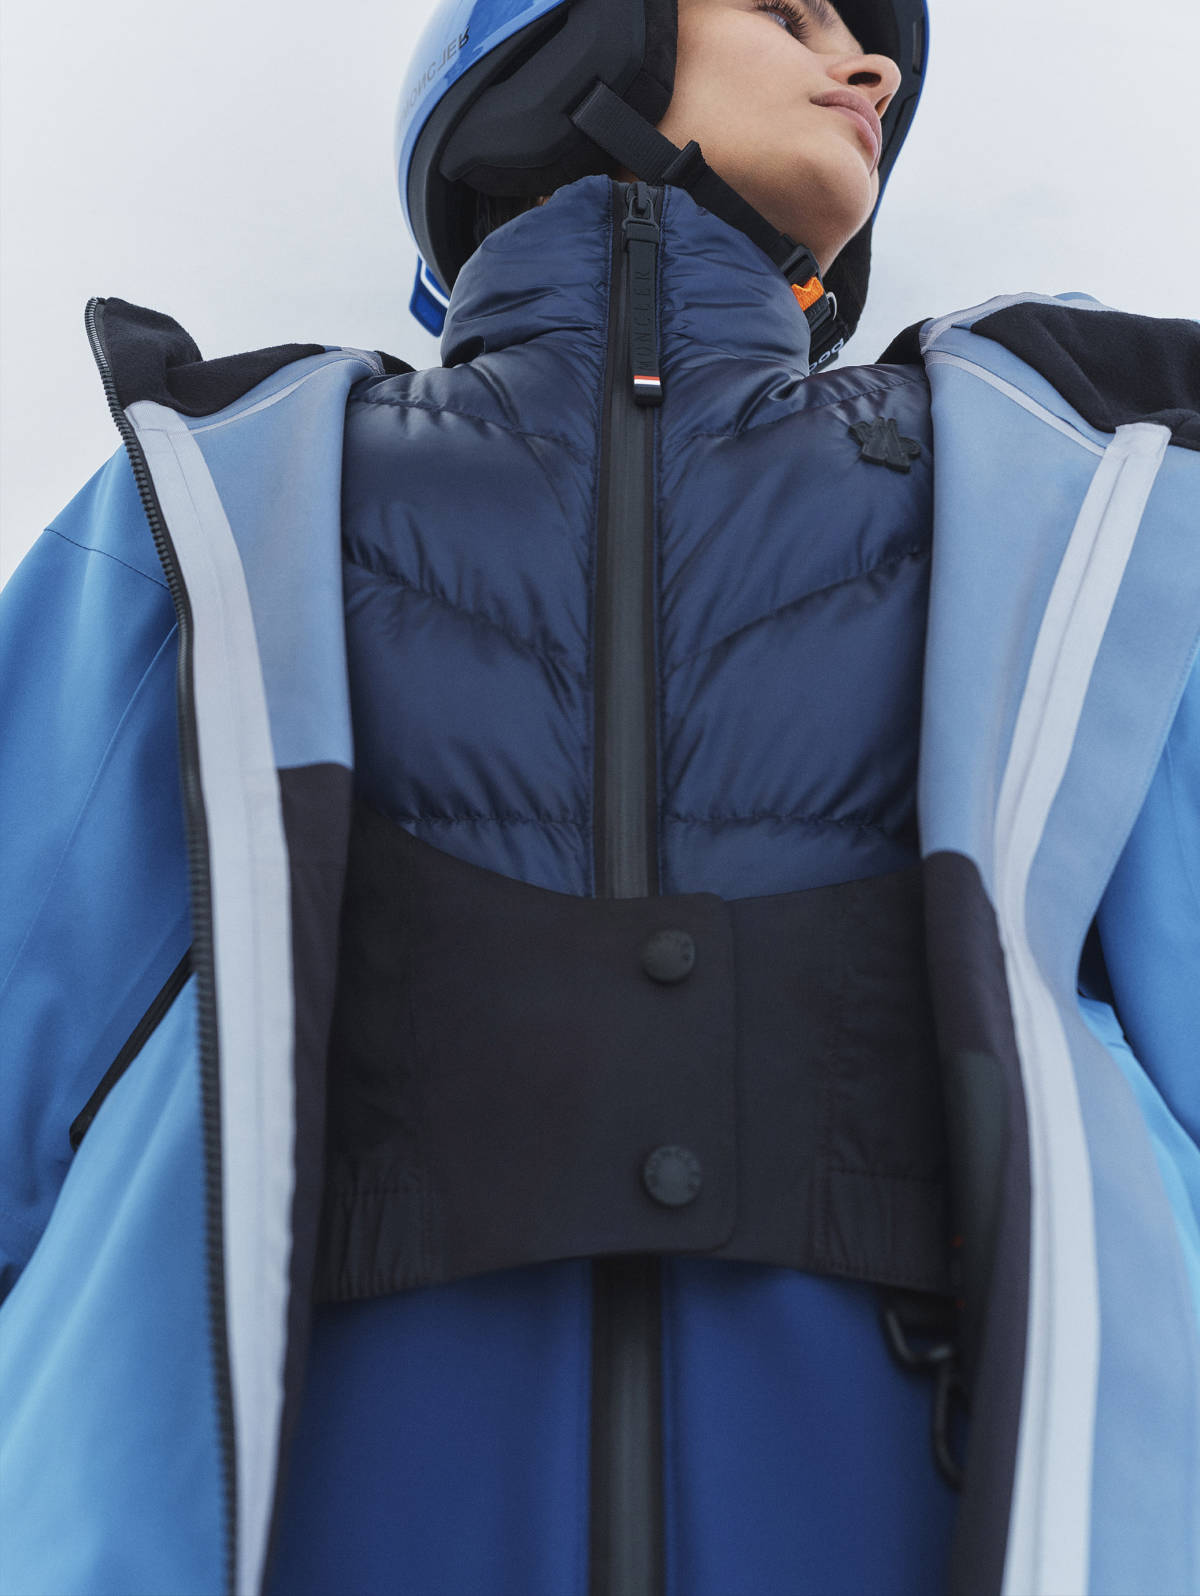 The Excellence of Moncler Grenoble